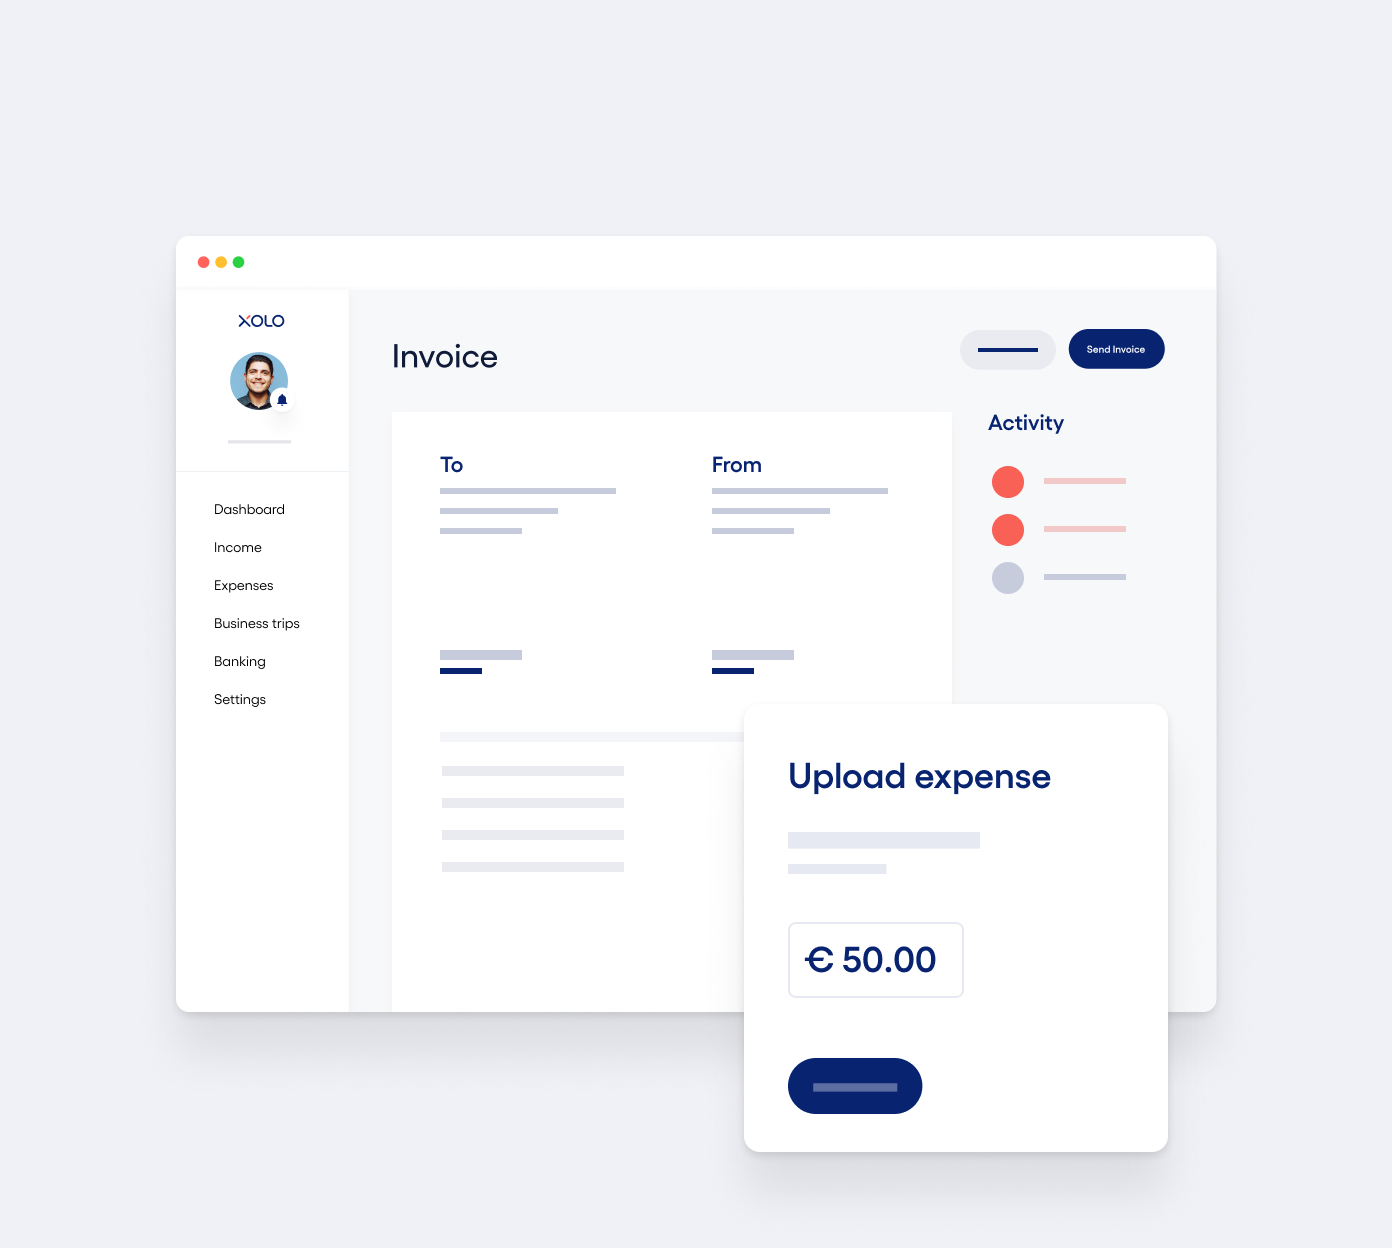 invoice page